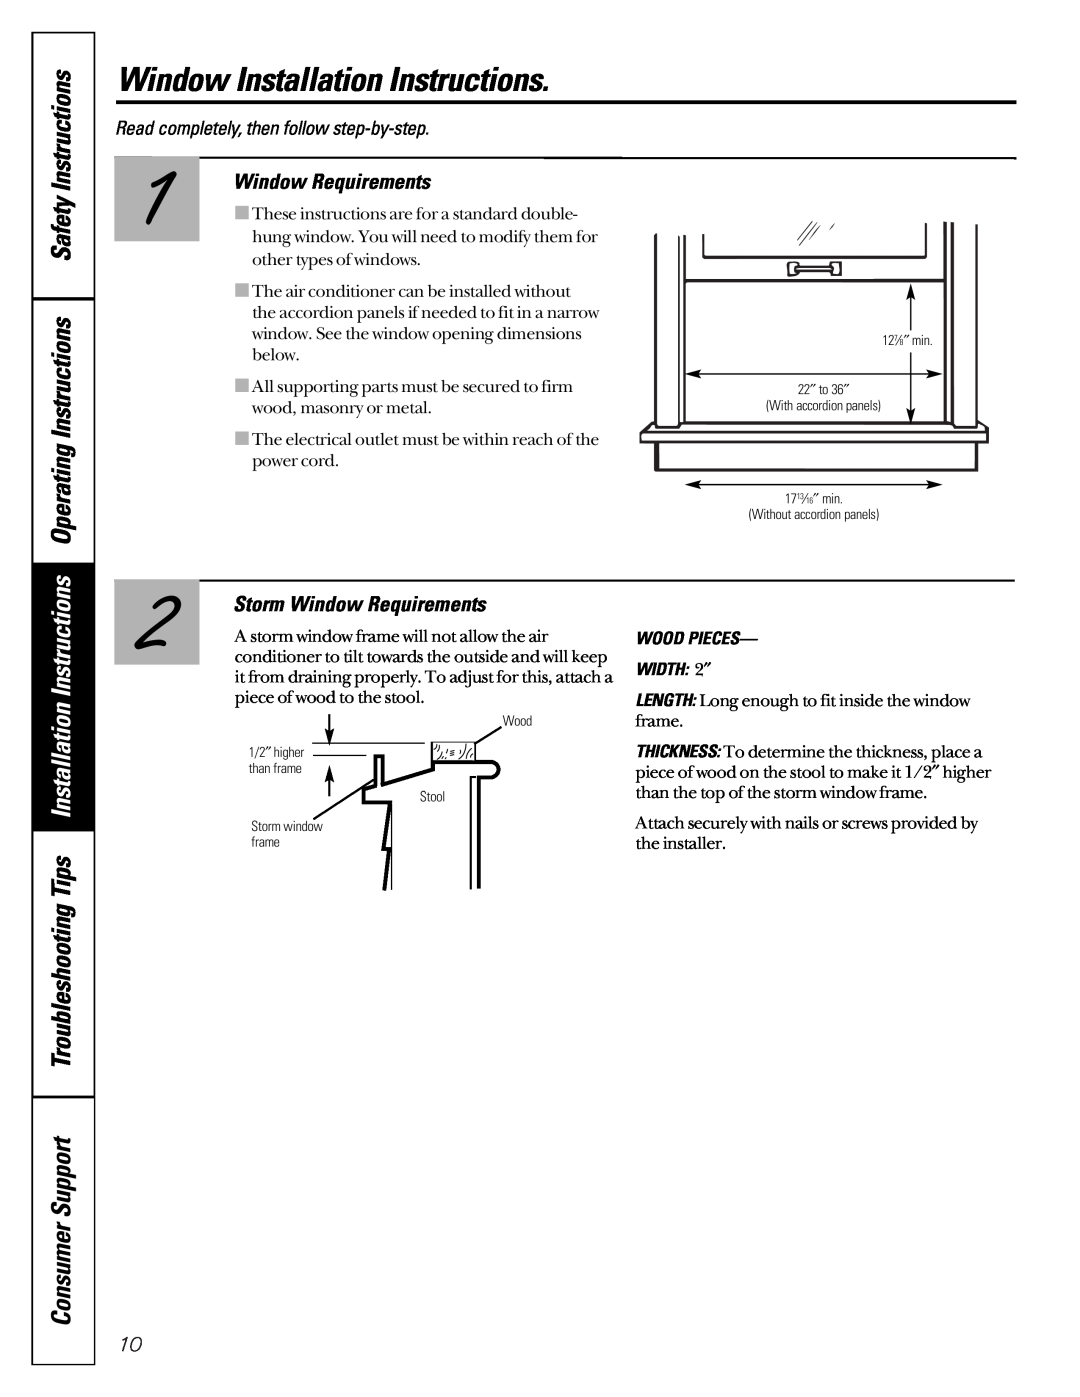 GE ASV05, AST06, AST05 Operating Instructions Safety, Storm Window Requirements, Window Installation Instructions 